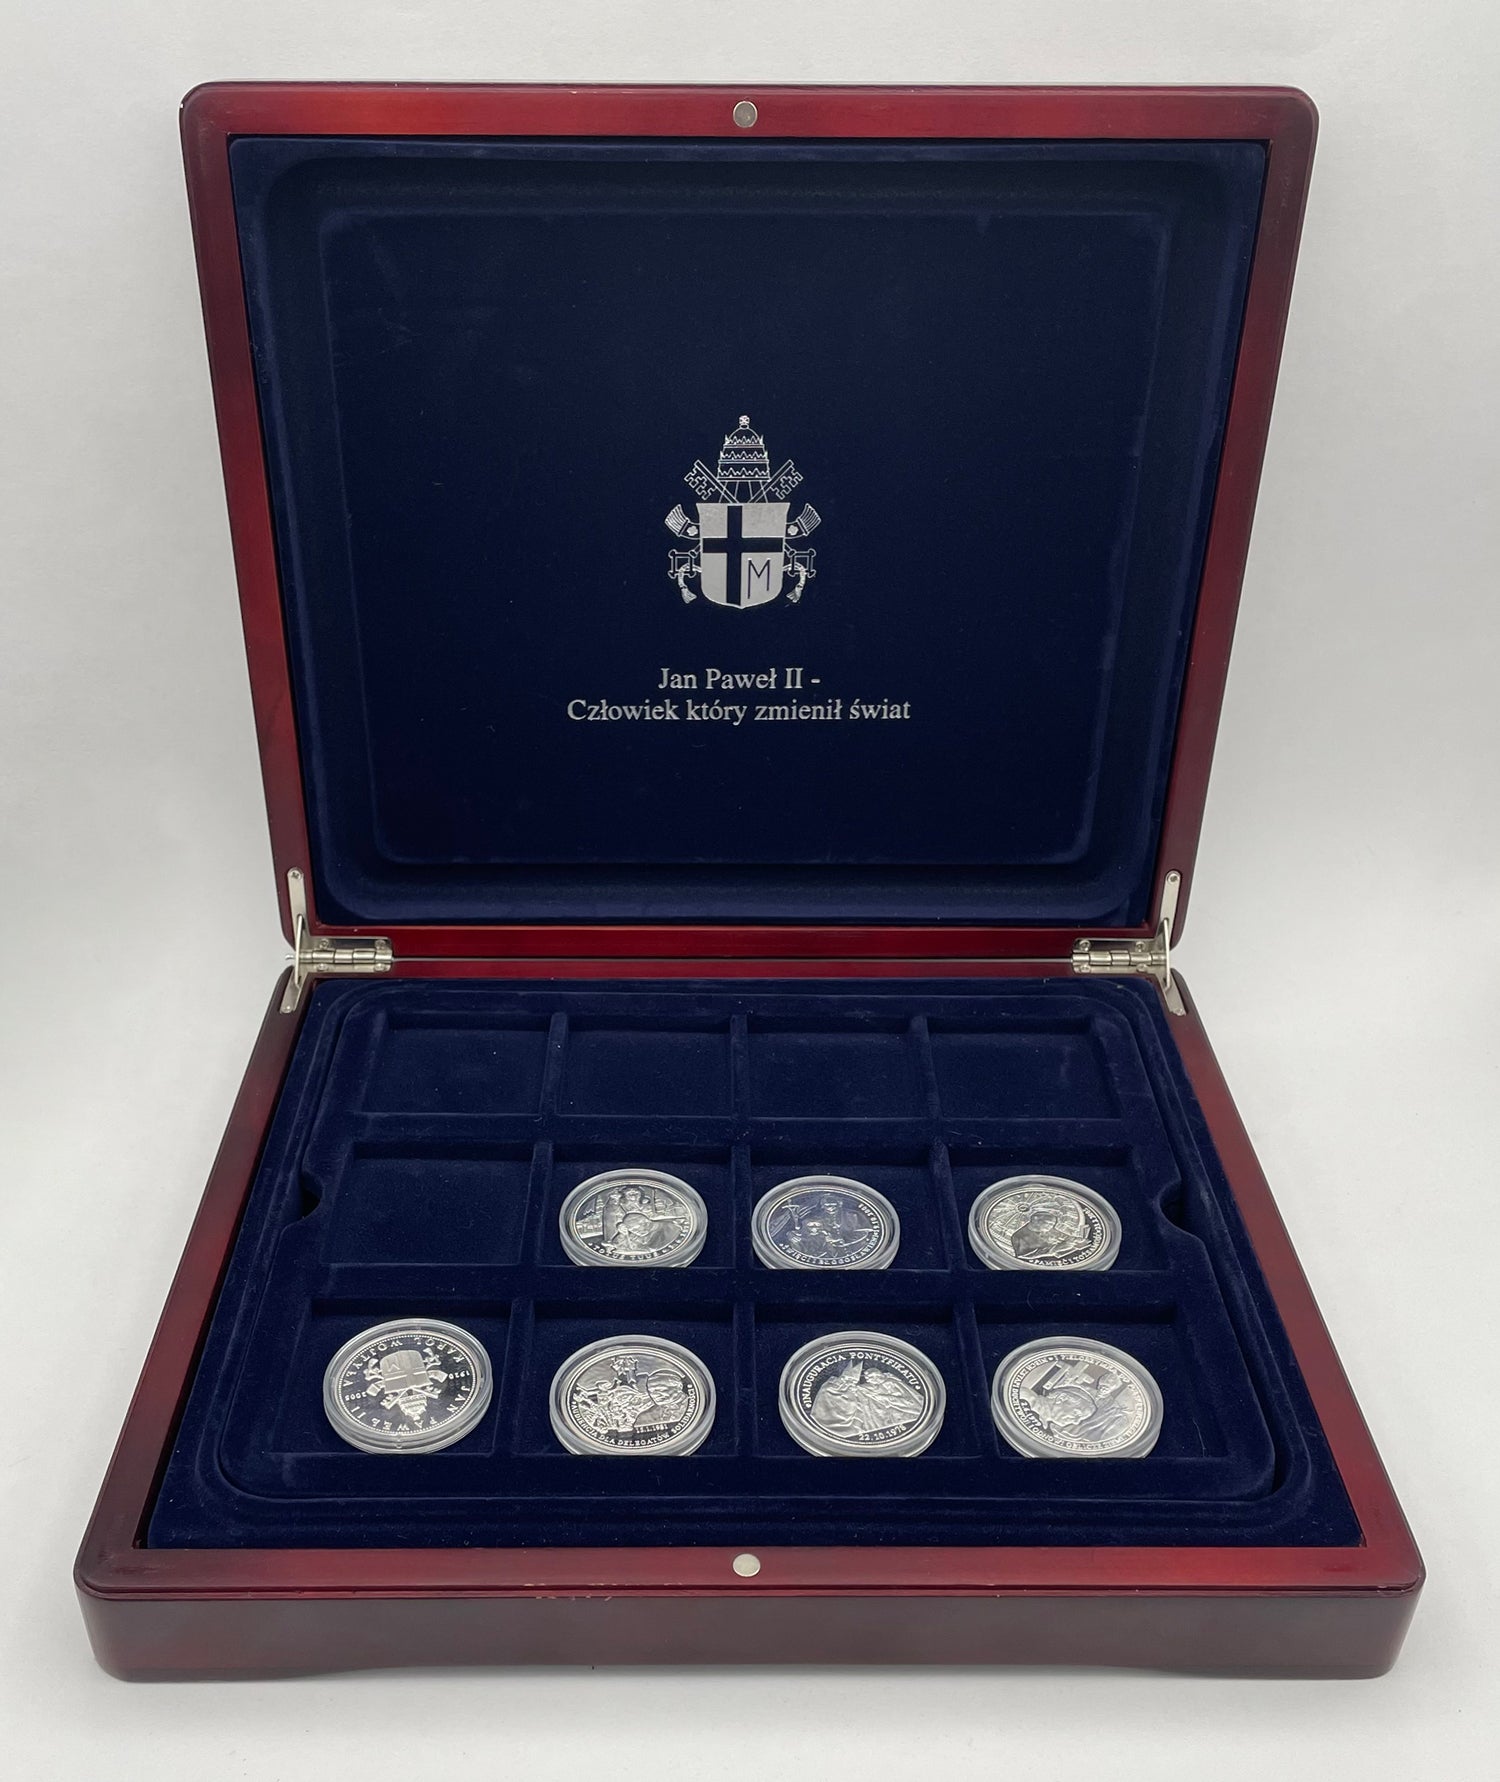 19 of 500 Proof Silver Medals of John Paul II Collection